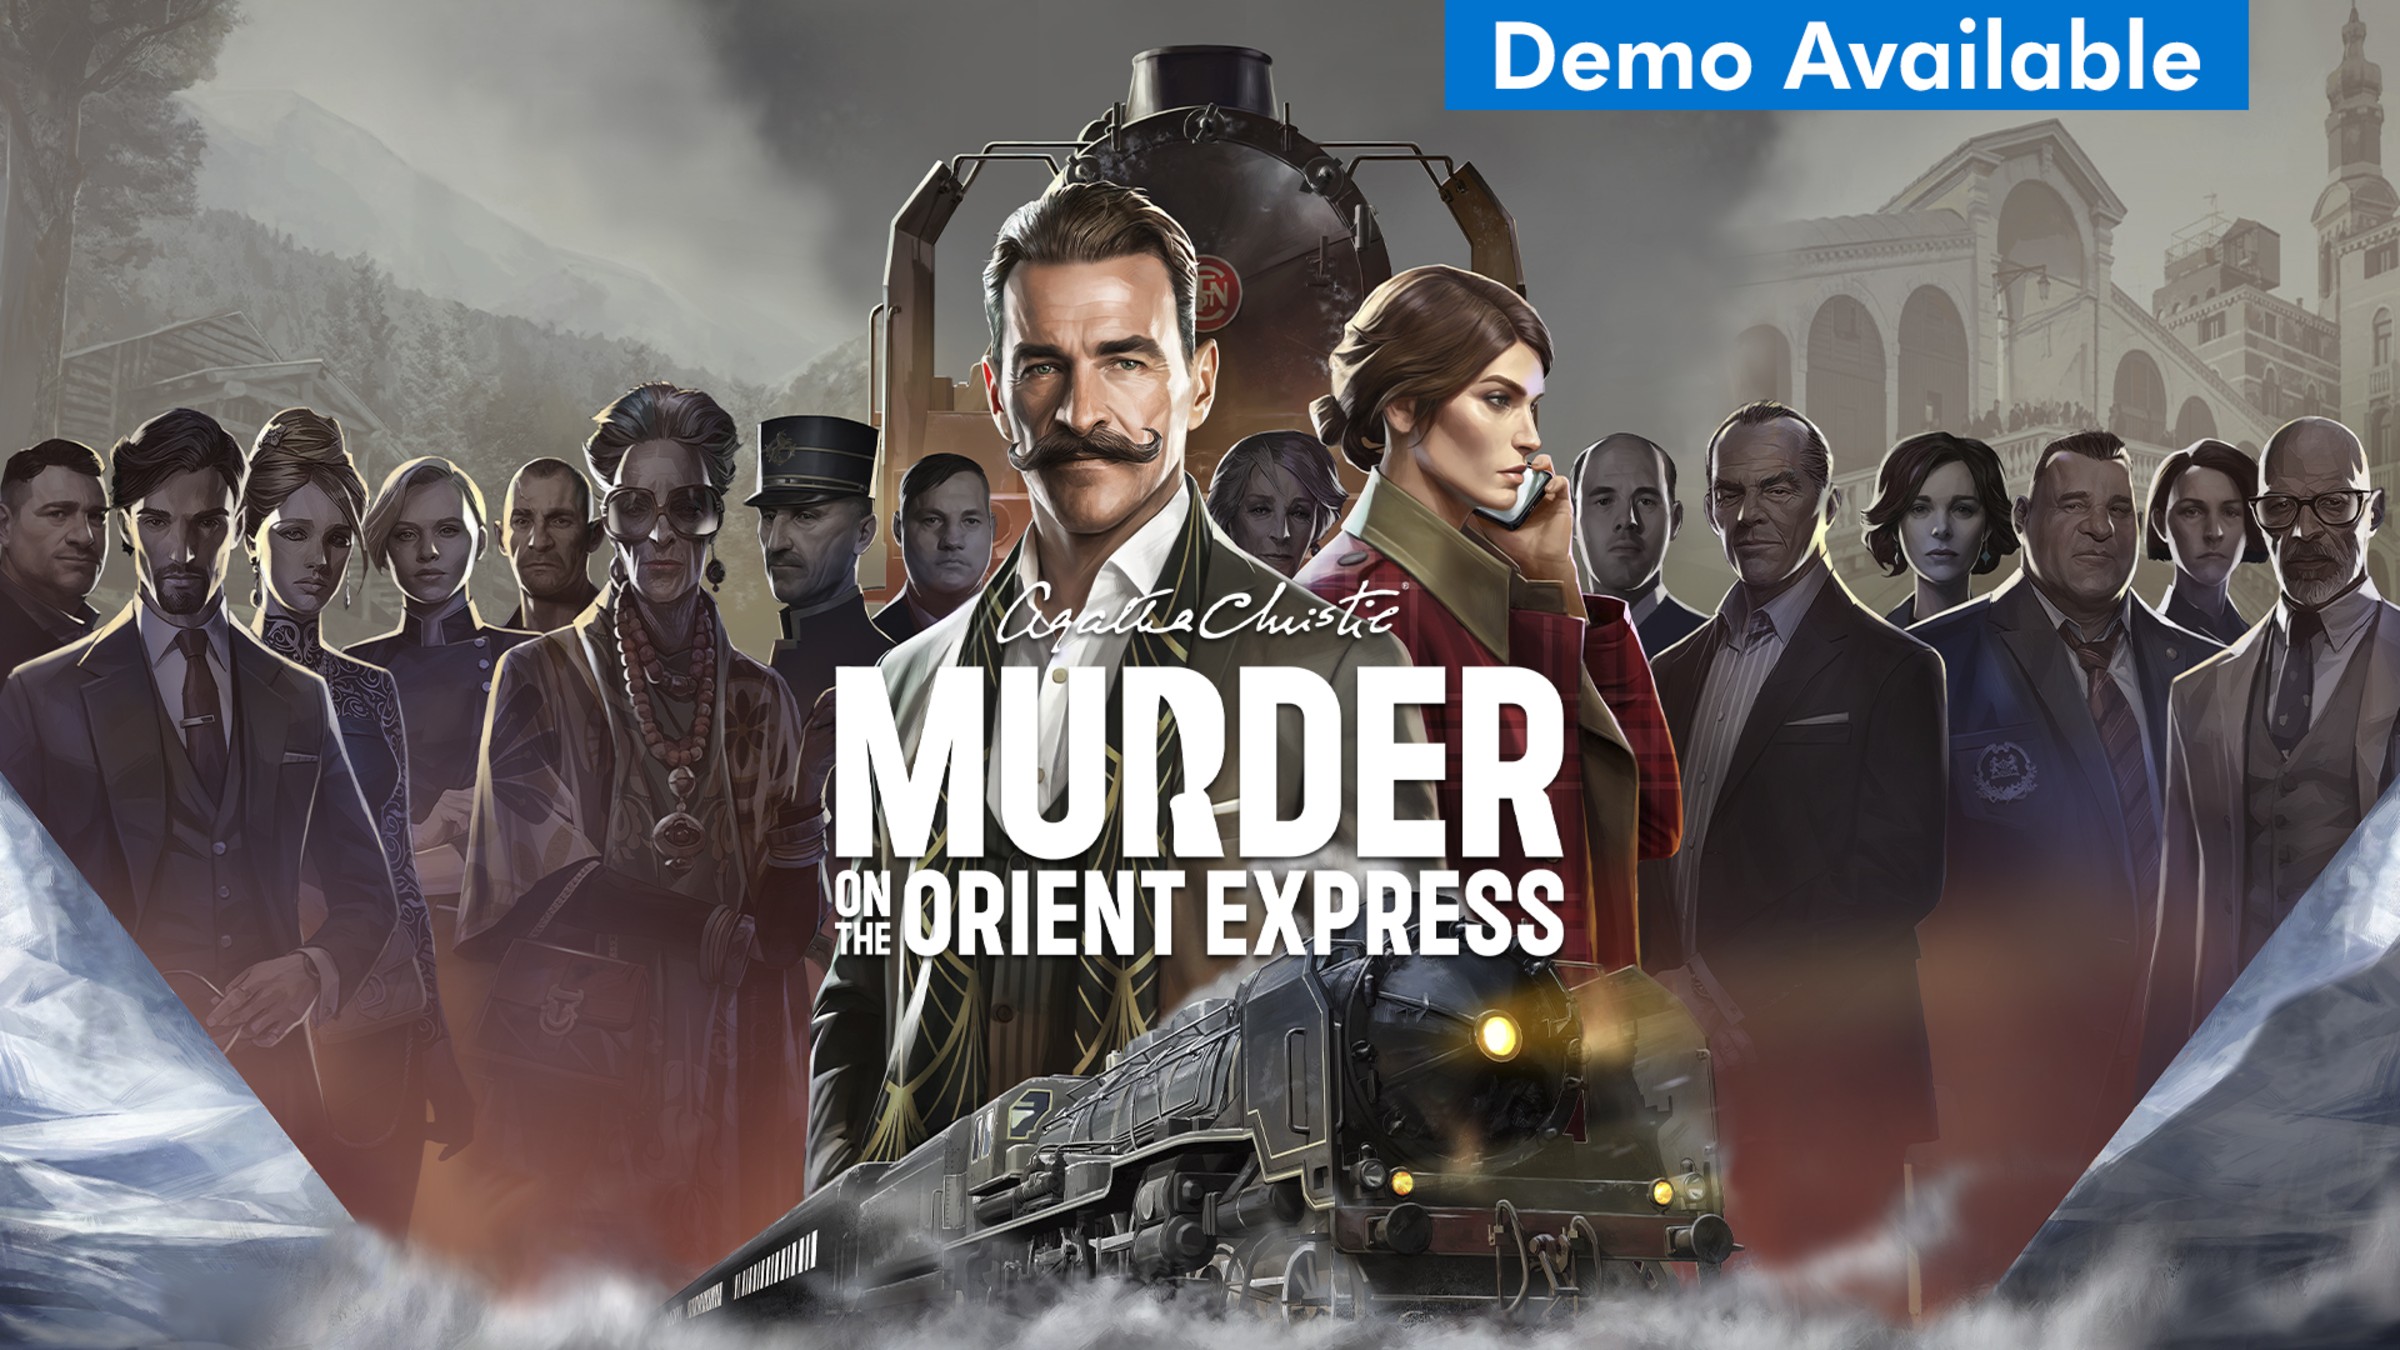 Agatha Christie - Nintendo - Orient Nintendo Official Switch Murder for Site the Express on